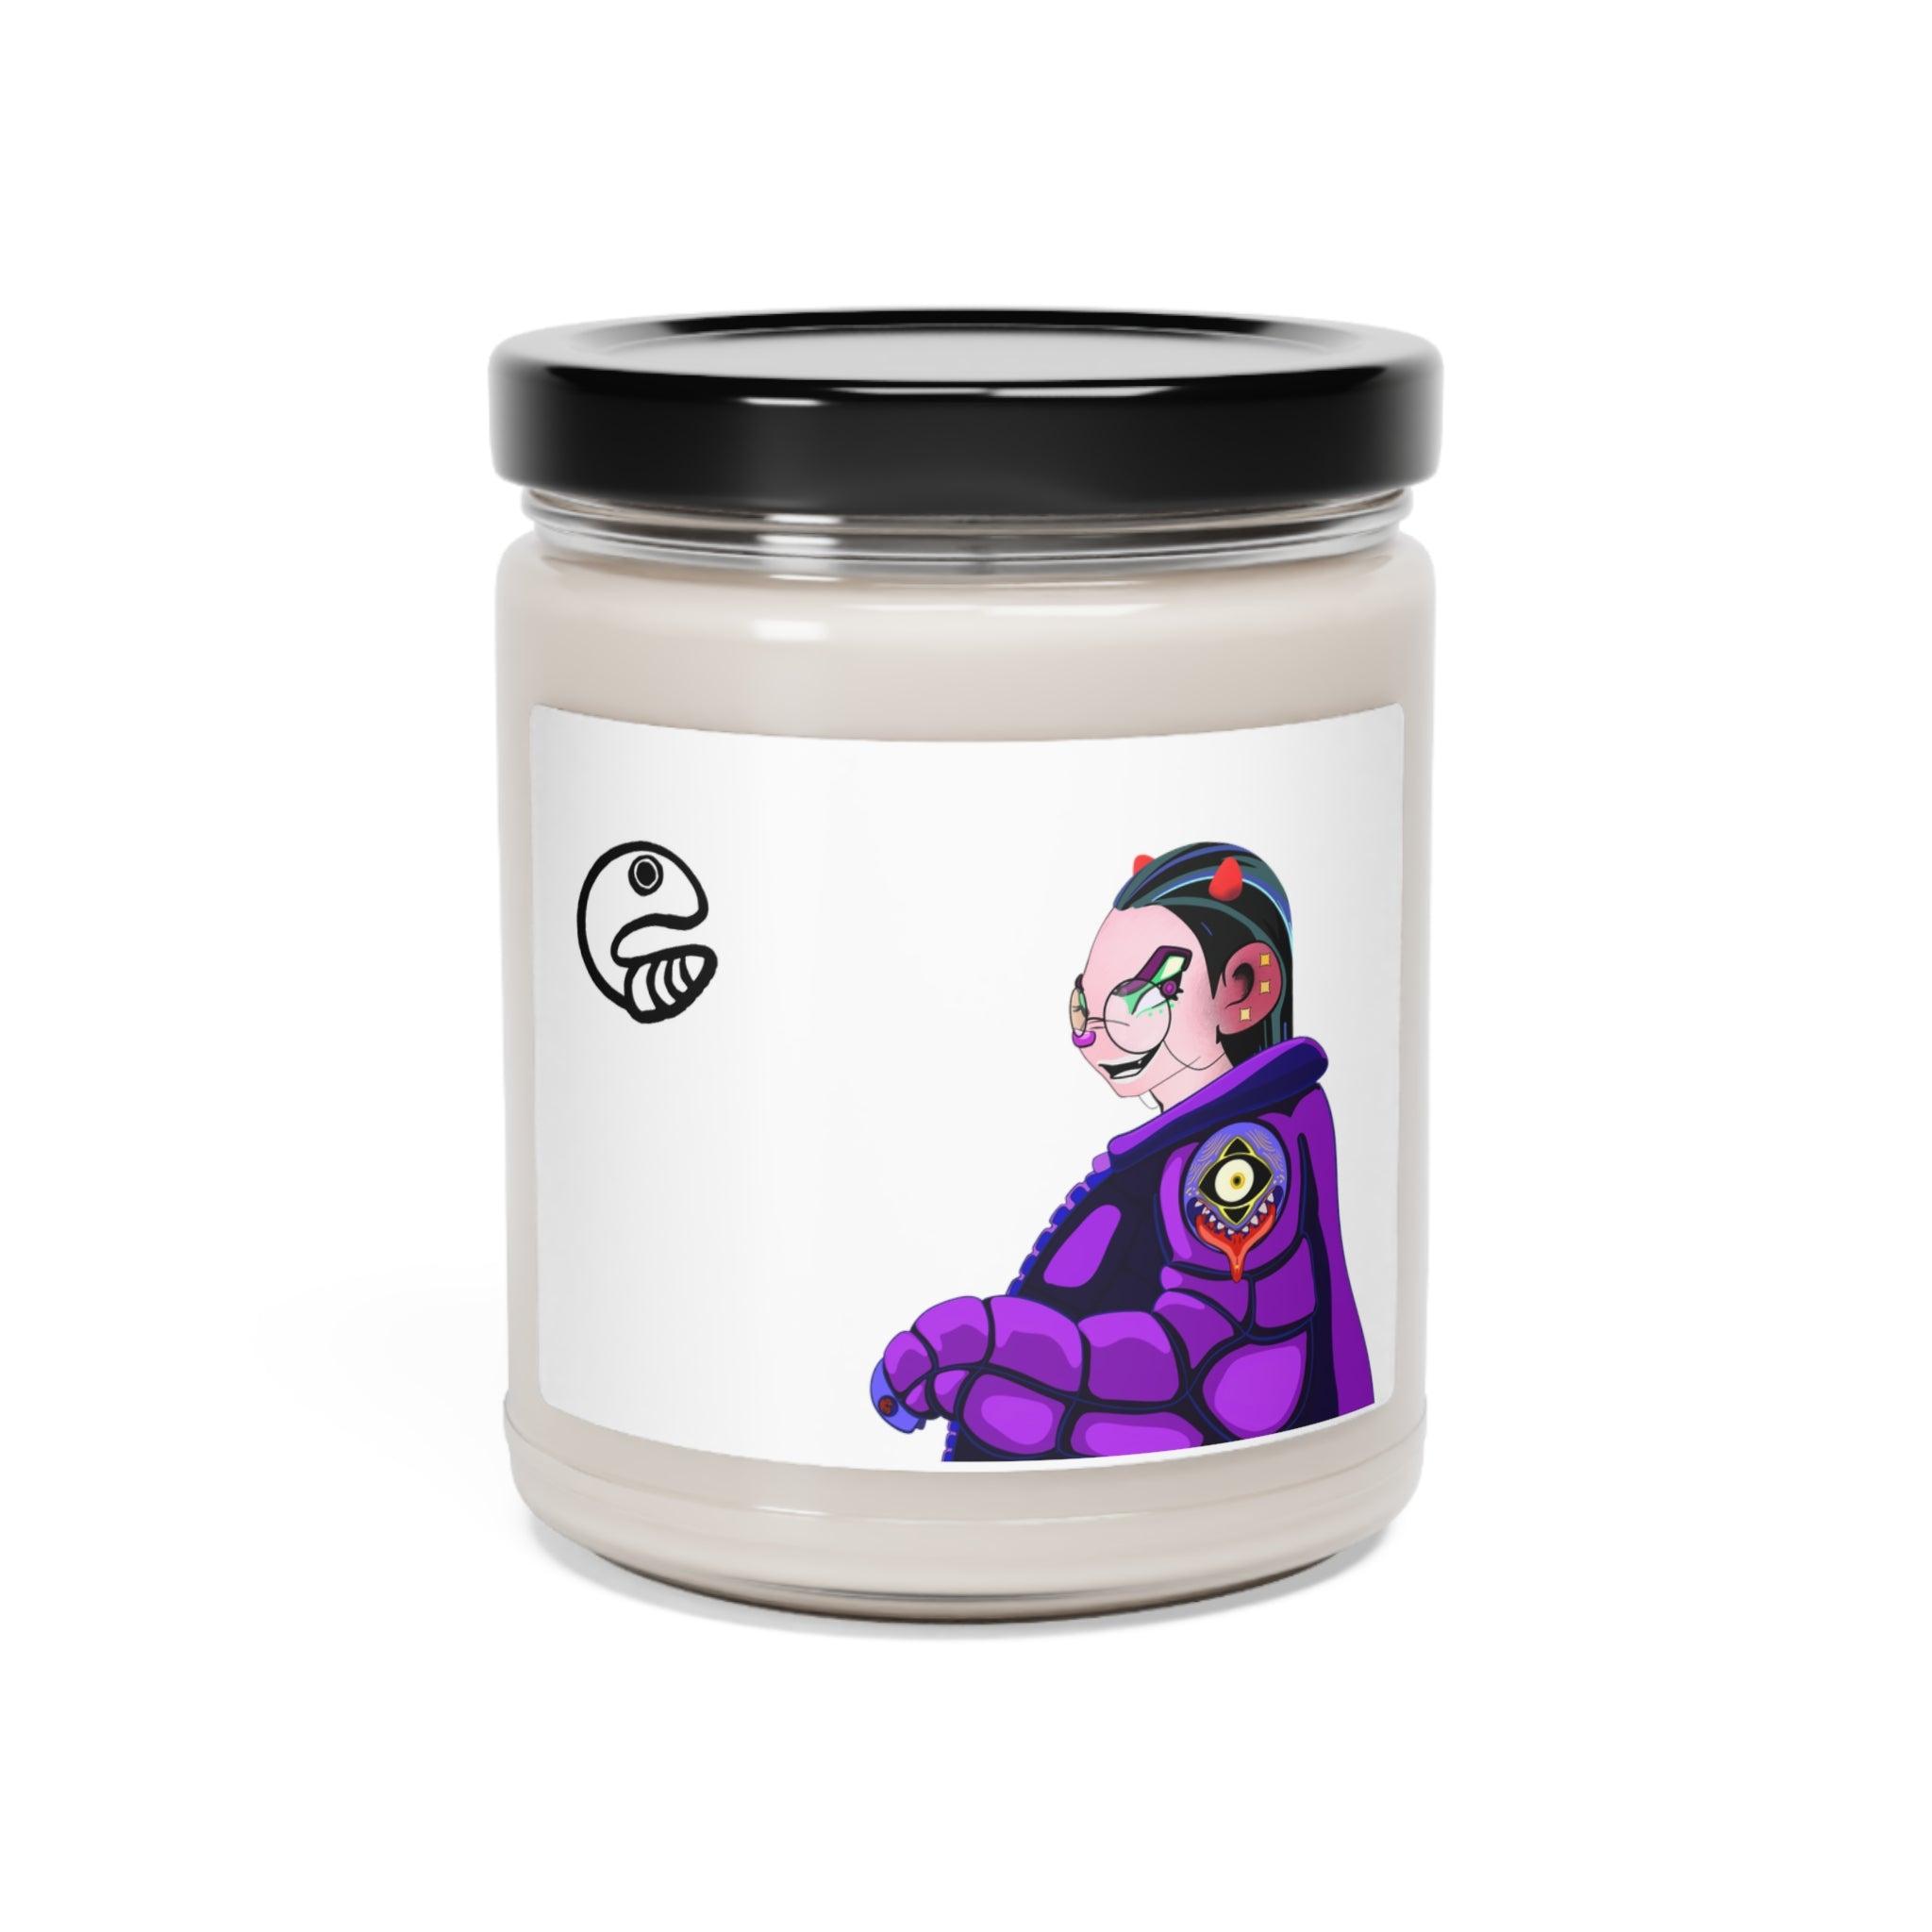 Female Tribe Scented Soy Candle, 9oz - 12580046049604056421_2048